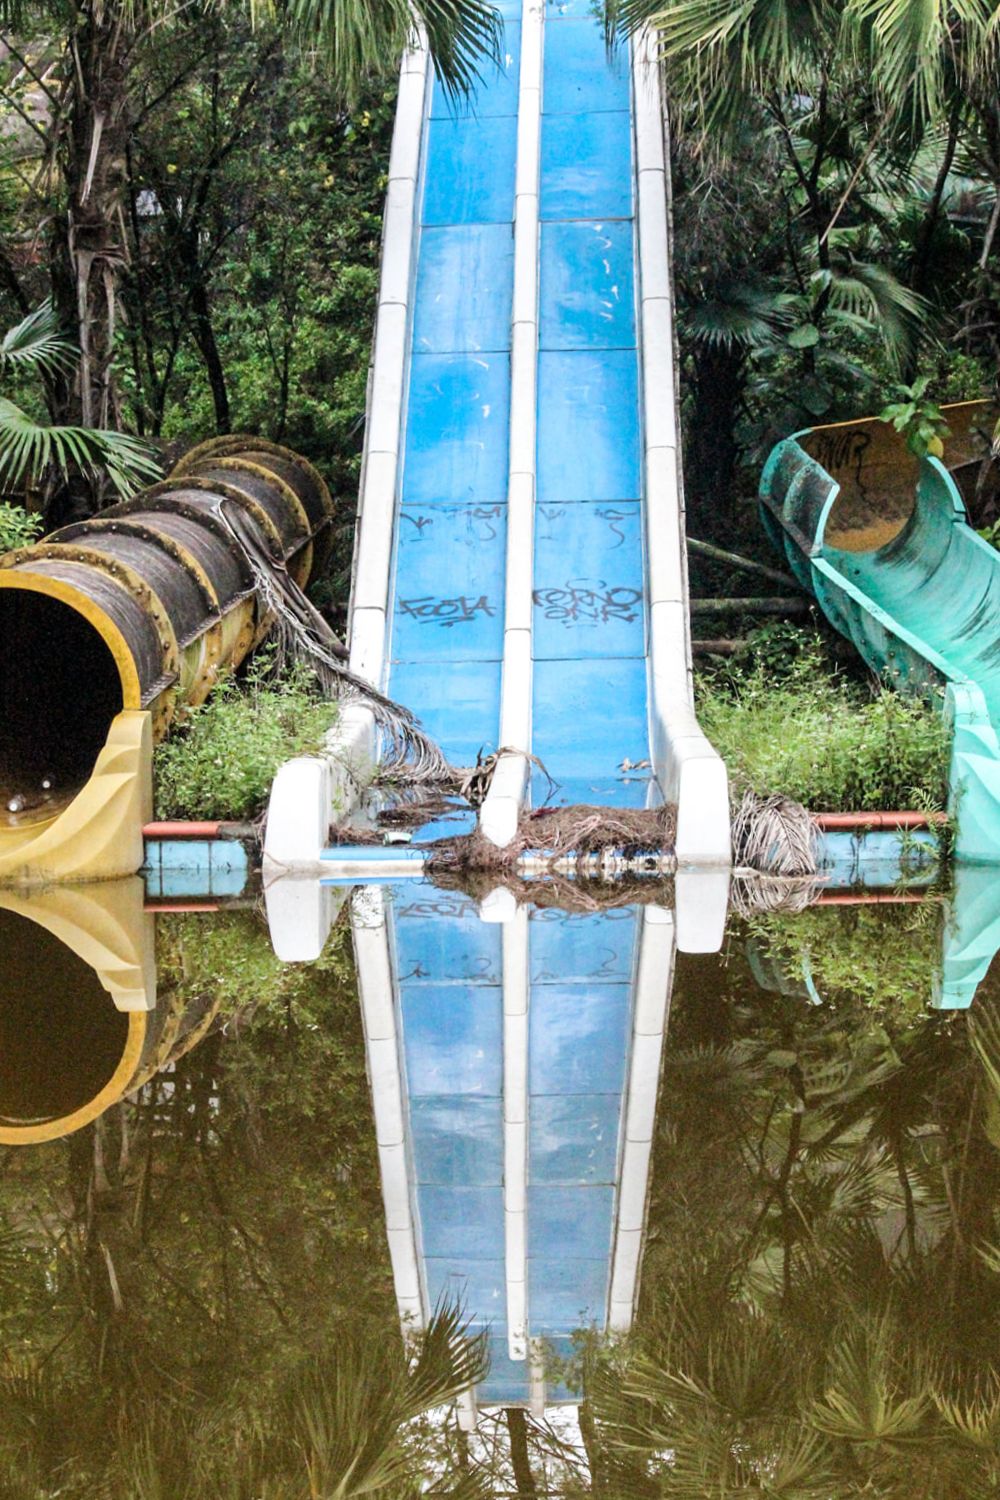 The water park speed slide and dirty water // Hue: Ho Thuy Tien, Photos of Vietnam's Abandoned Water Park.